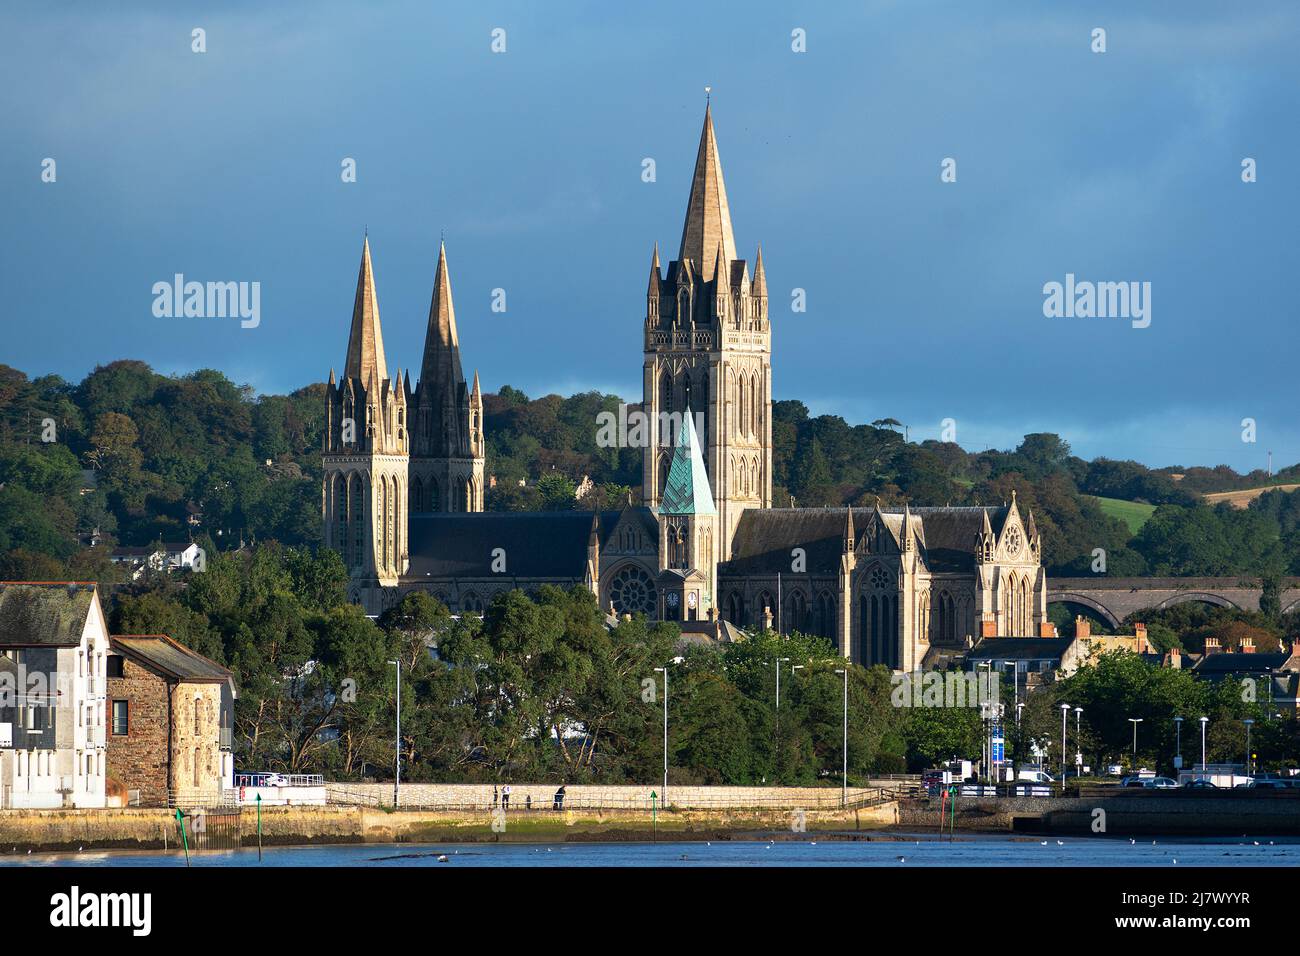 Truro Cathedral in Cornwall, England Stockfoto